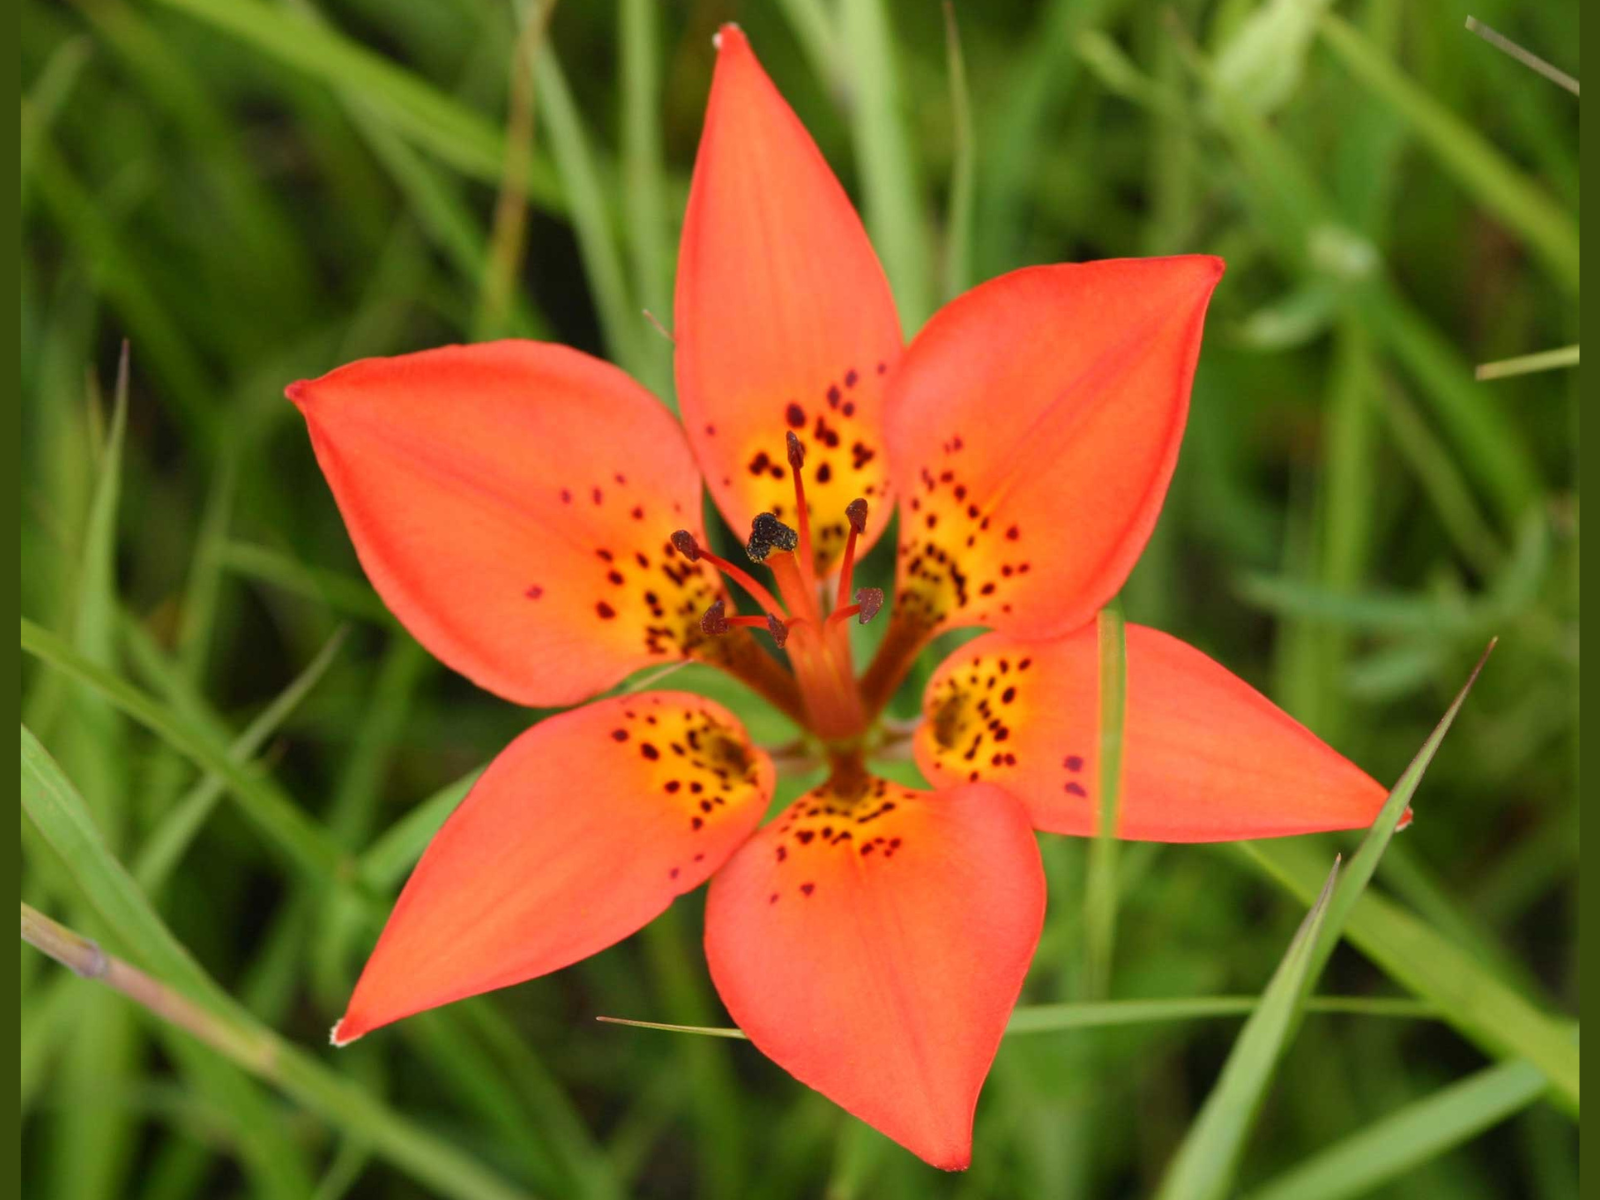 Looking down at a six-petaled Western red lily.